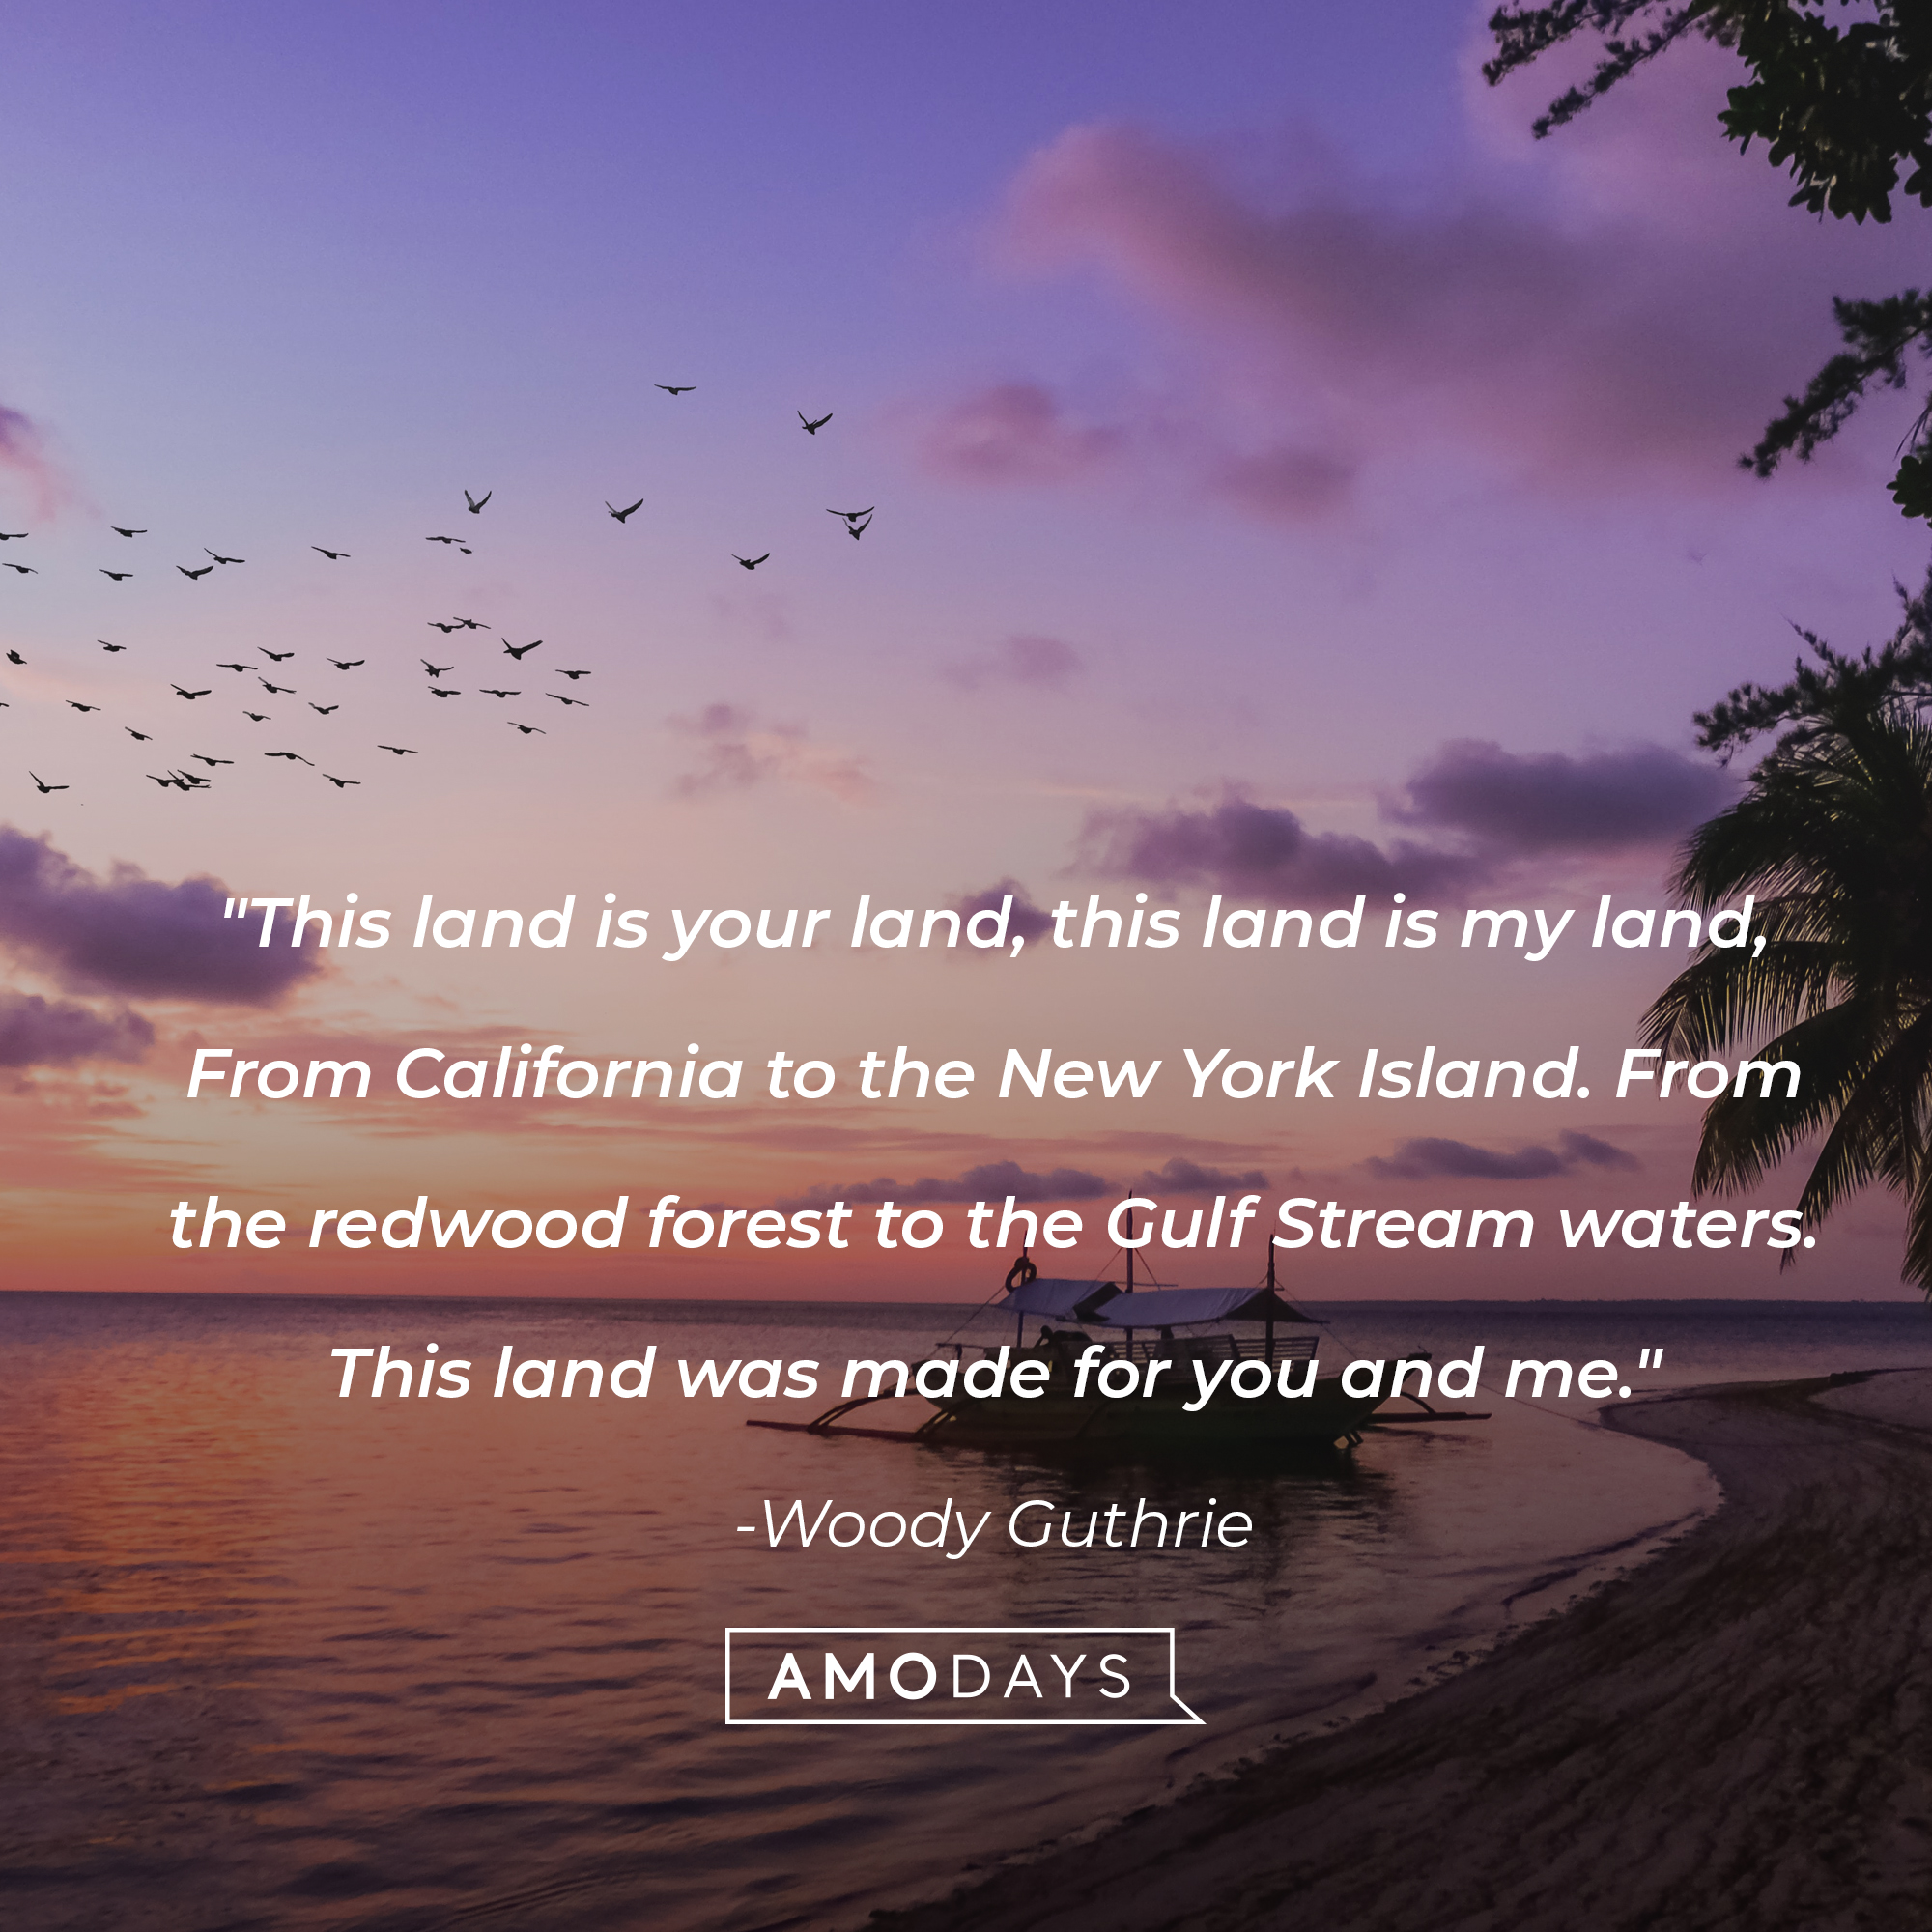 Woody Guthrie's quote: "This land is your land, this land is my land, From California to the New York Island. From the redwood forest to the Gulf Stream waters. This land was made for you and me." | Image: AmoDays